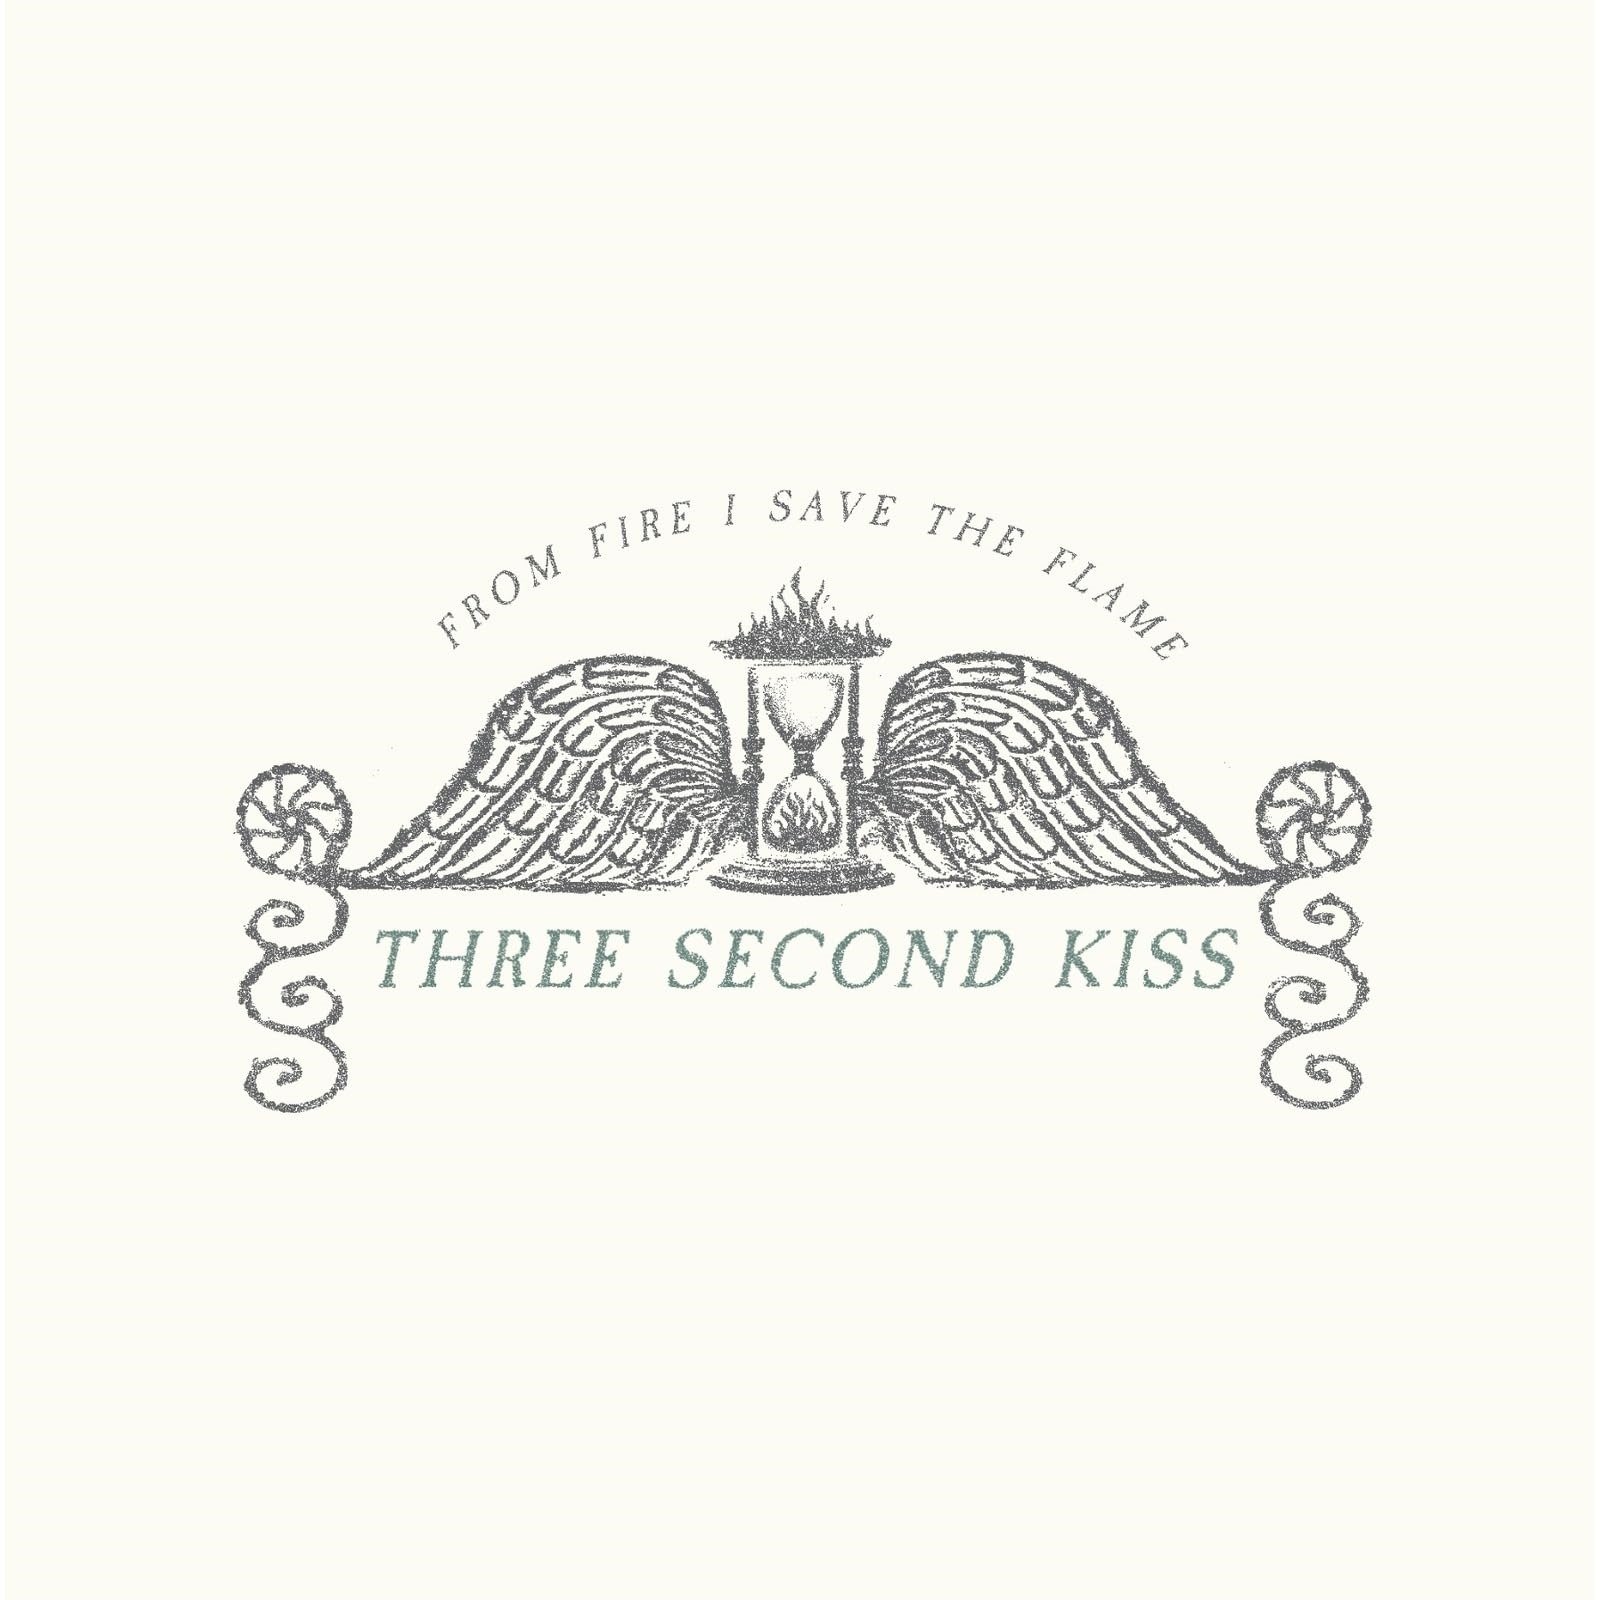 CD Shop - THREE SECOND KISS FROM FIRE I SAVE THE FLAME